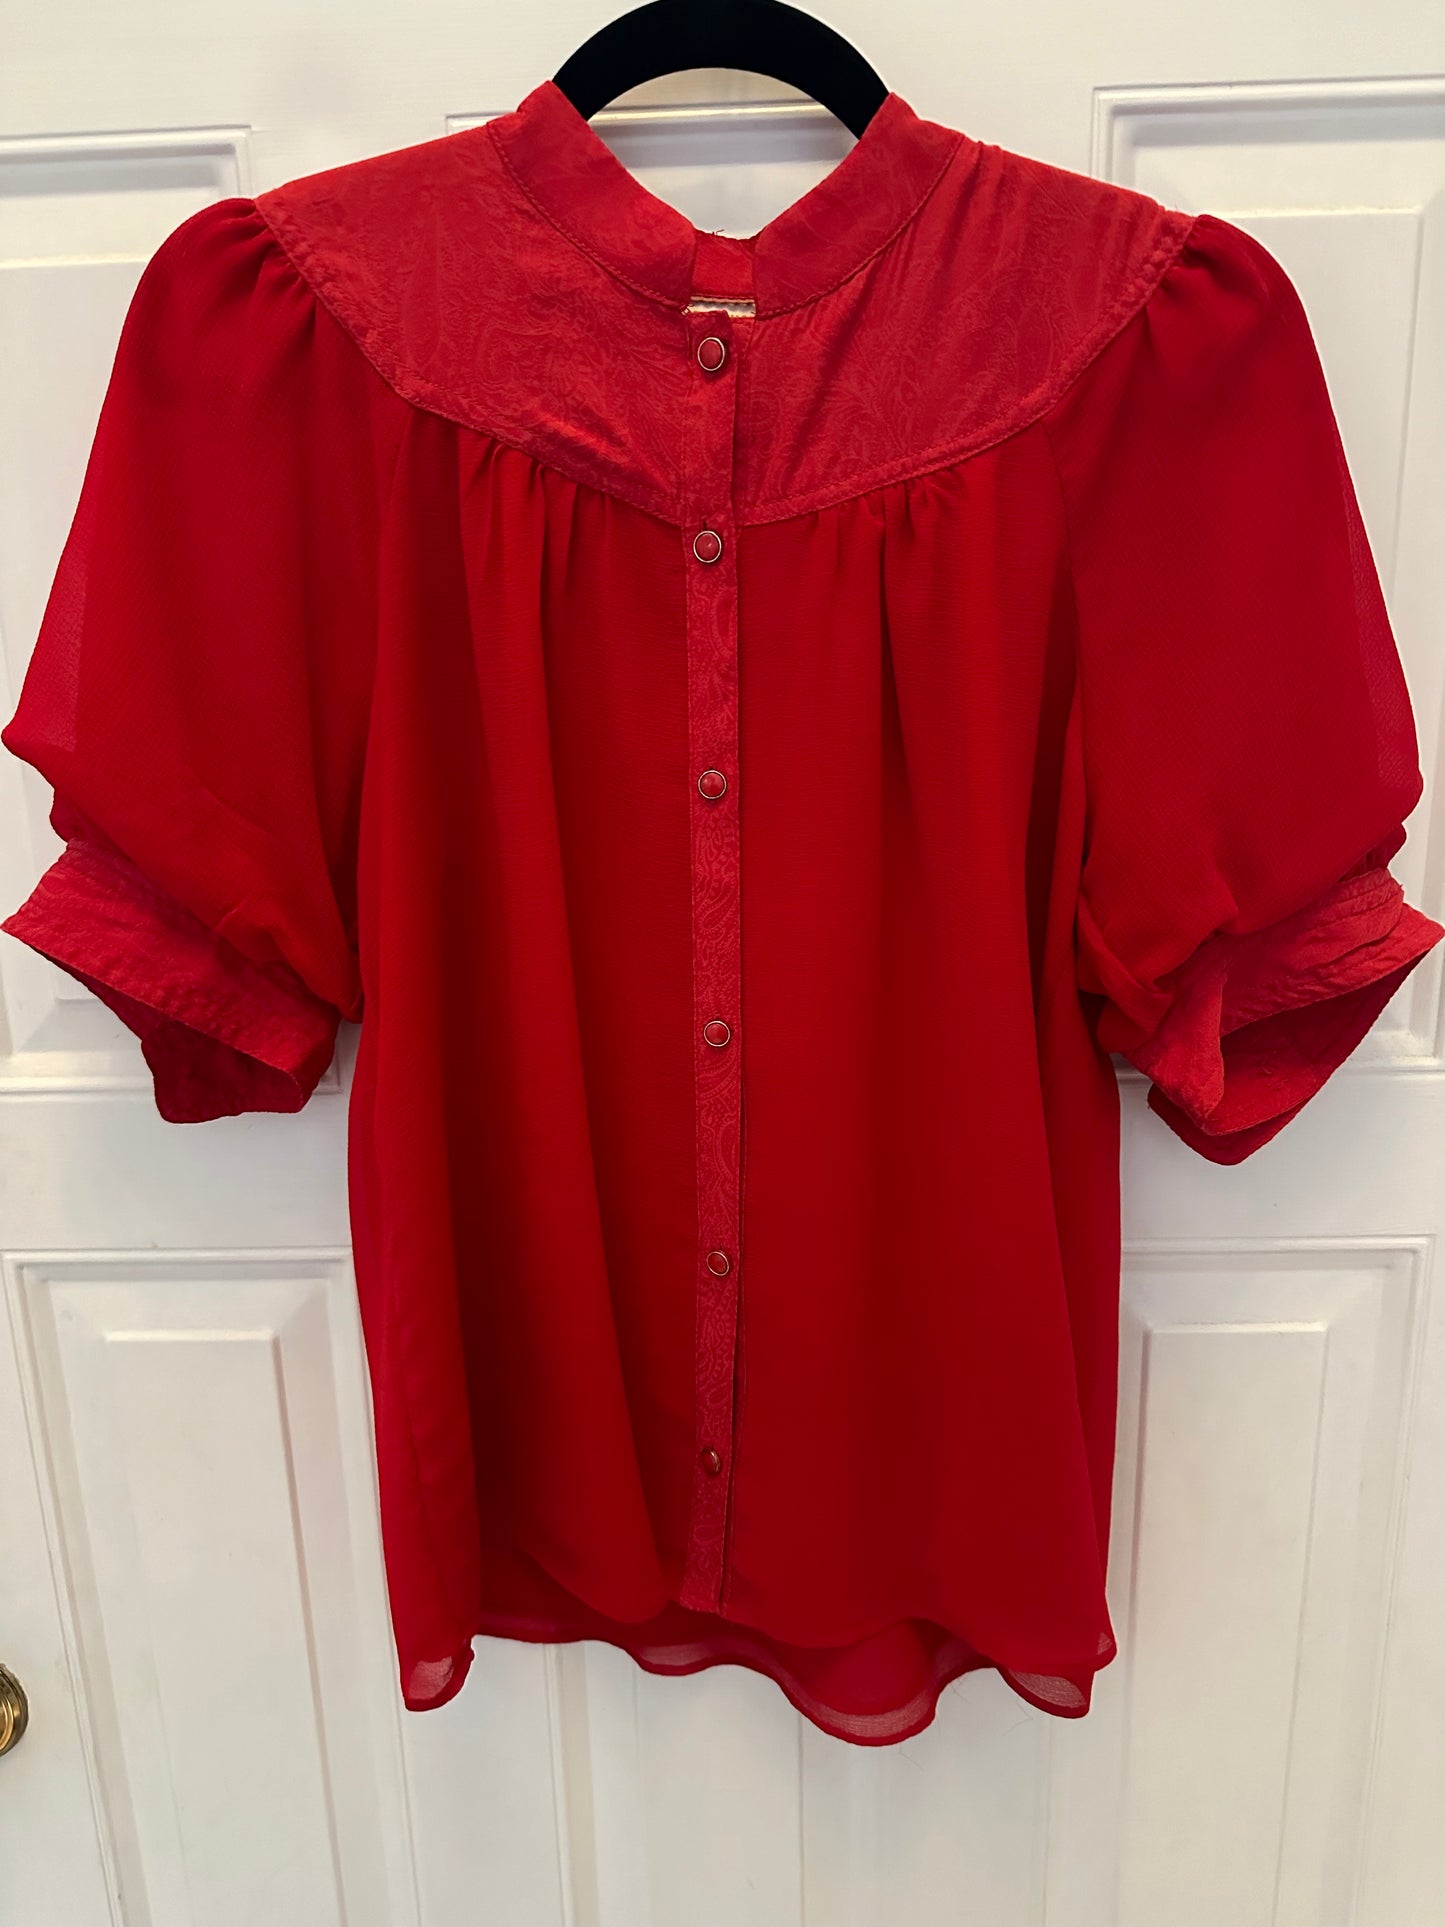 Maeve Anthropologie Women’s Red Sz 6 Top Blouse